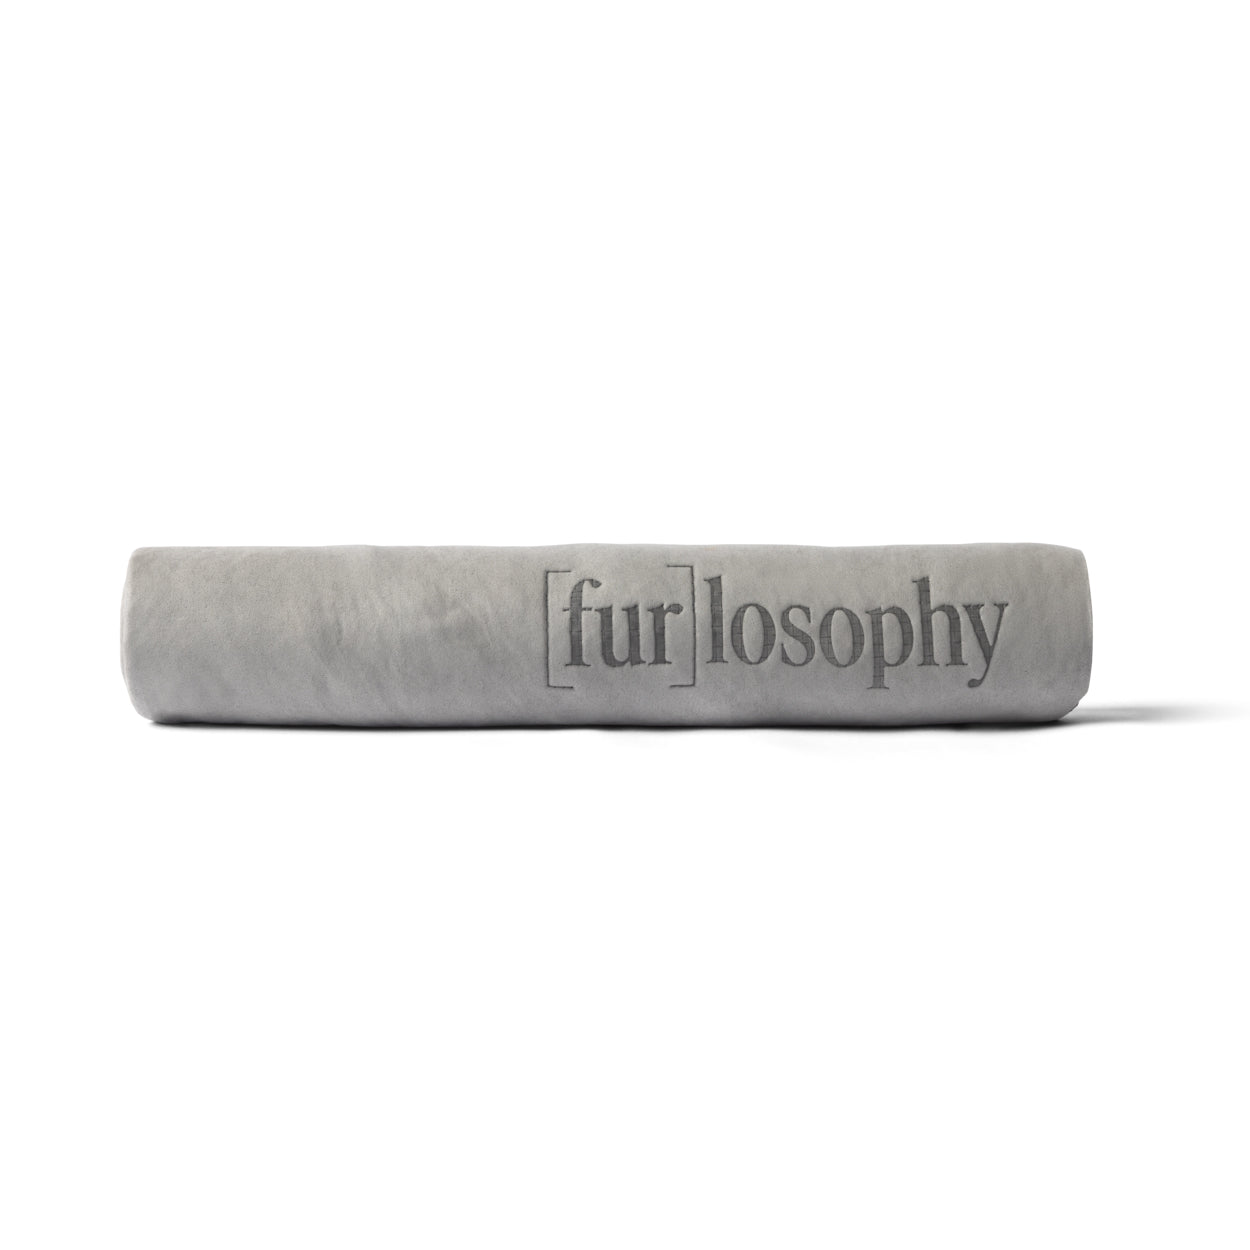 Replacement Dilution Bottle & Shaker Ball – [fur]losophy